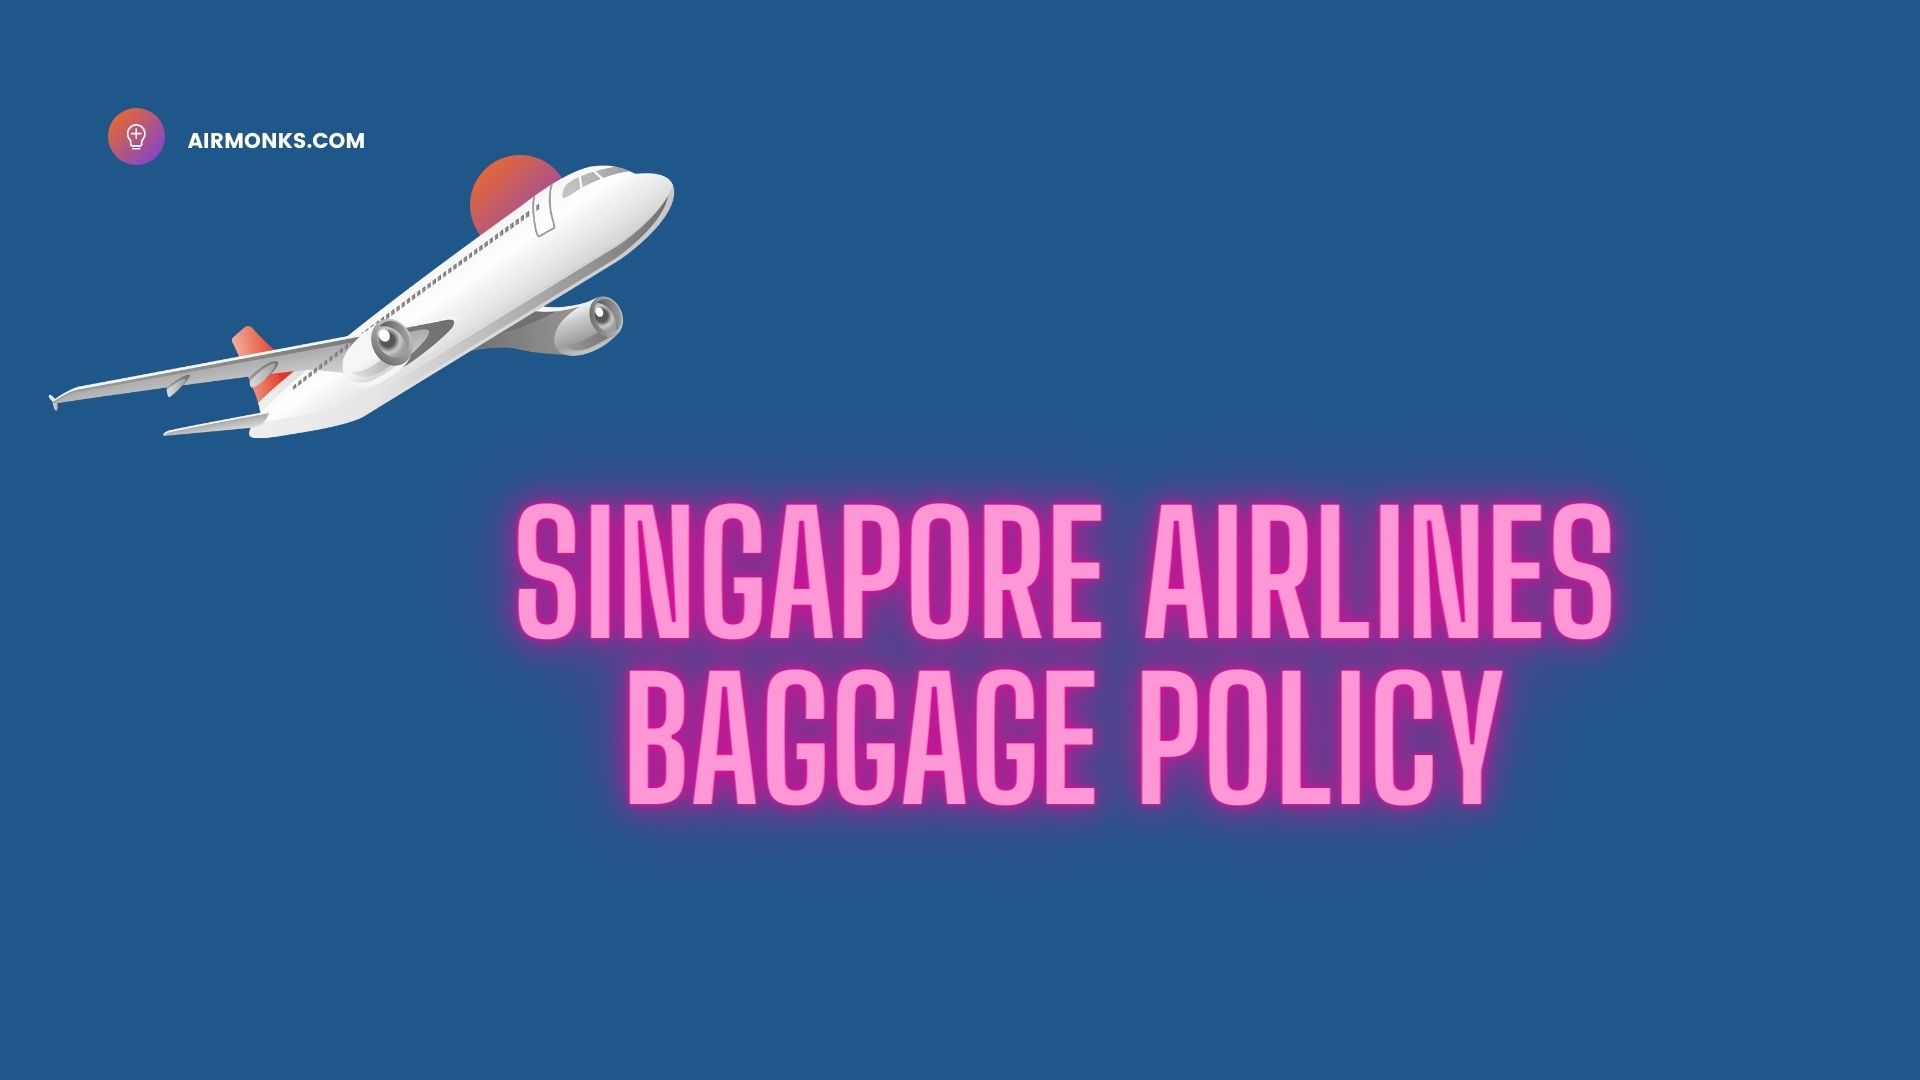 Singapore Airlines Baggage Policy63fef53634111.jpg